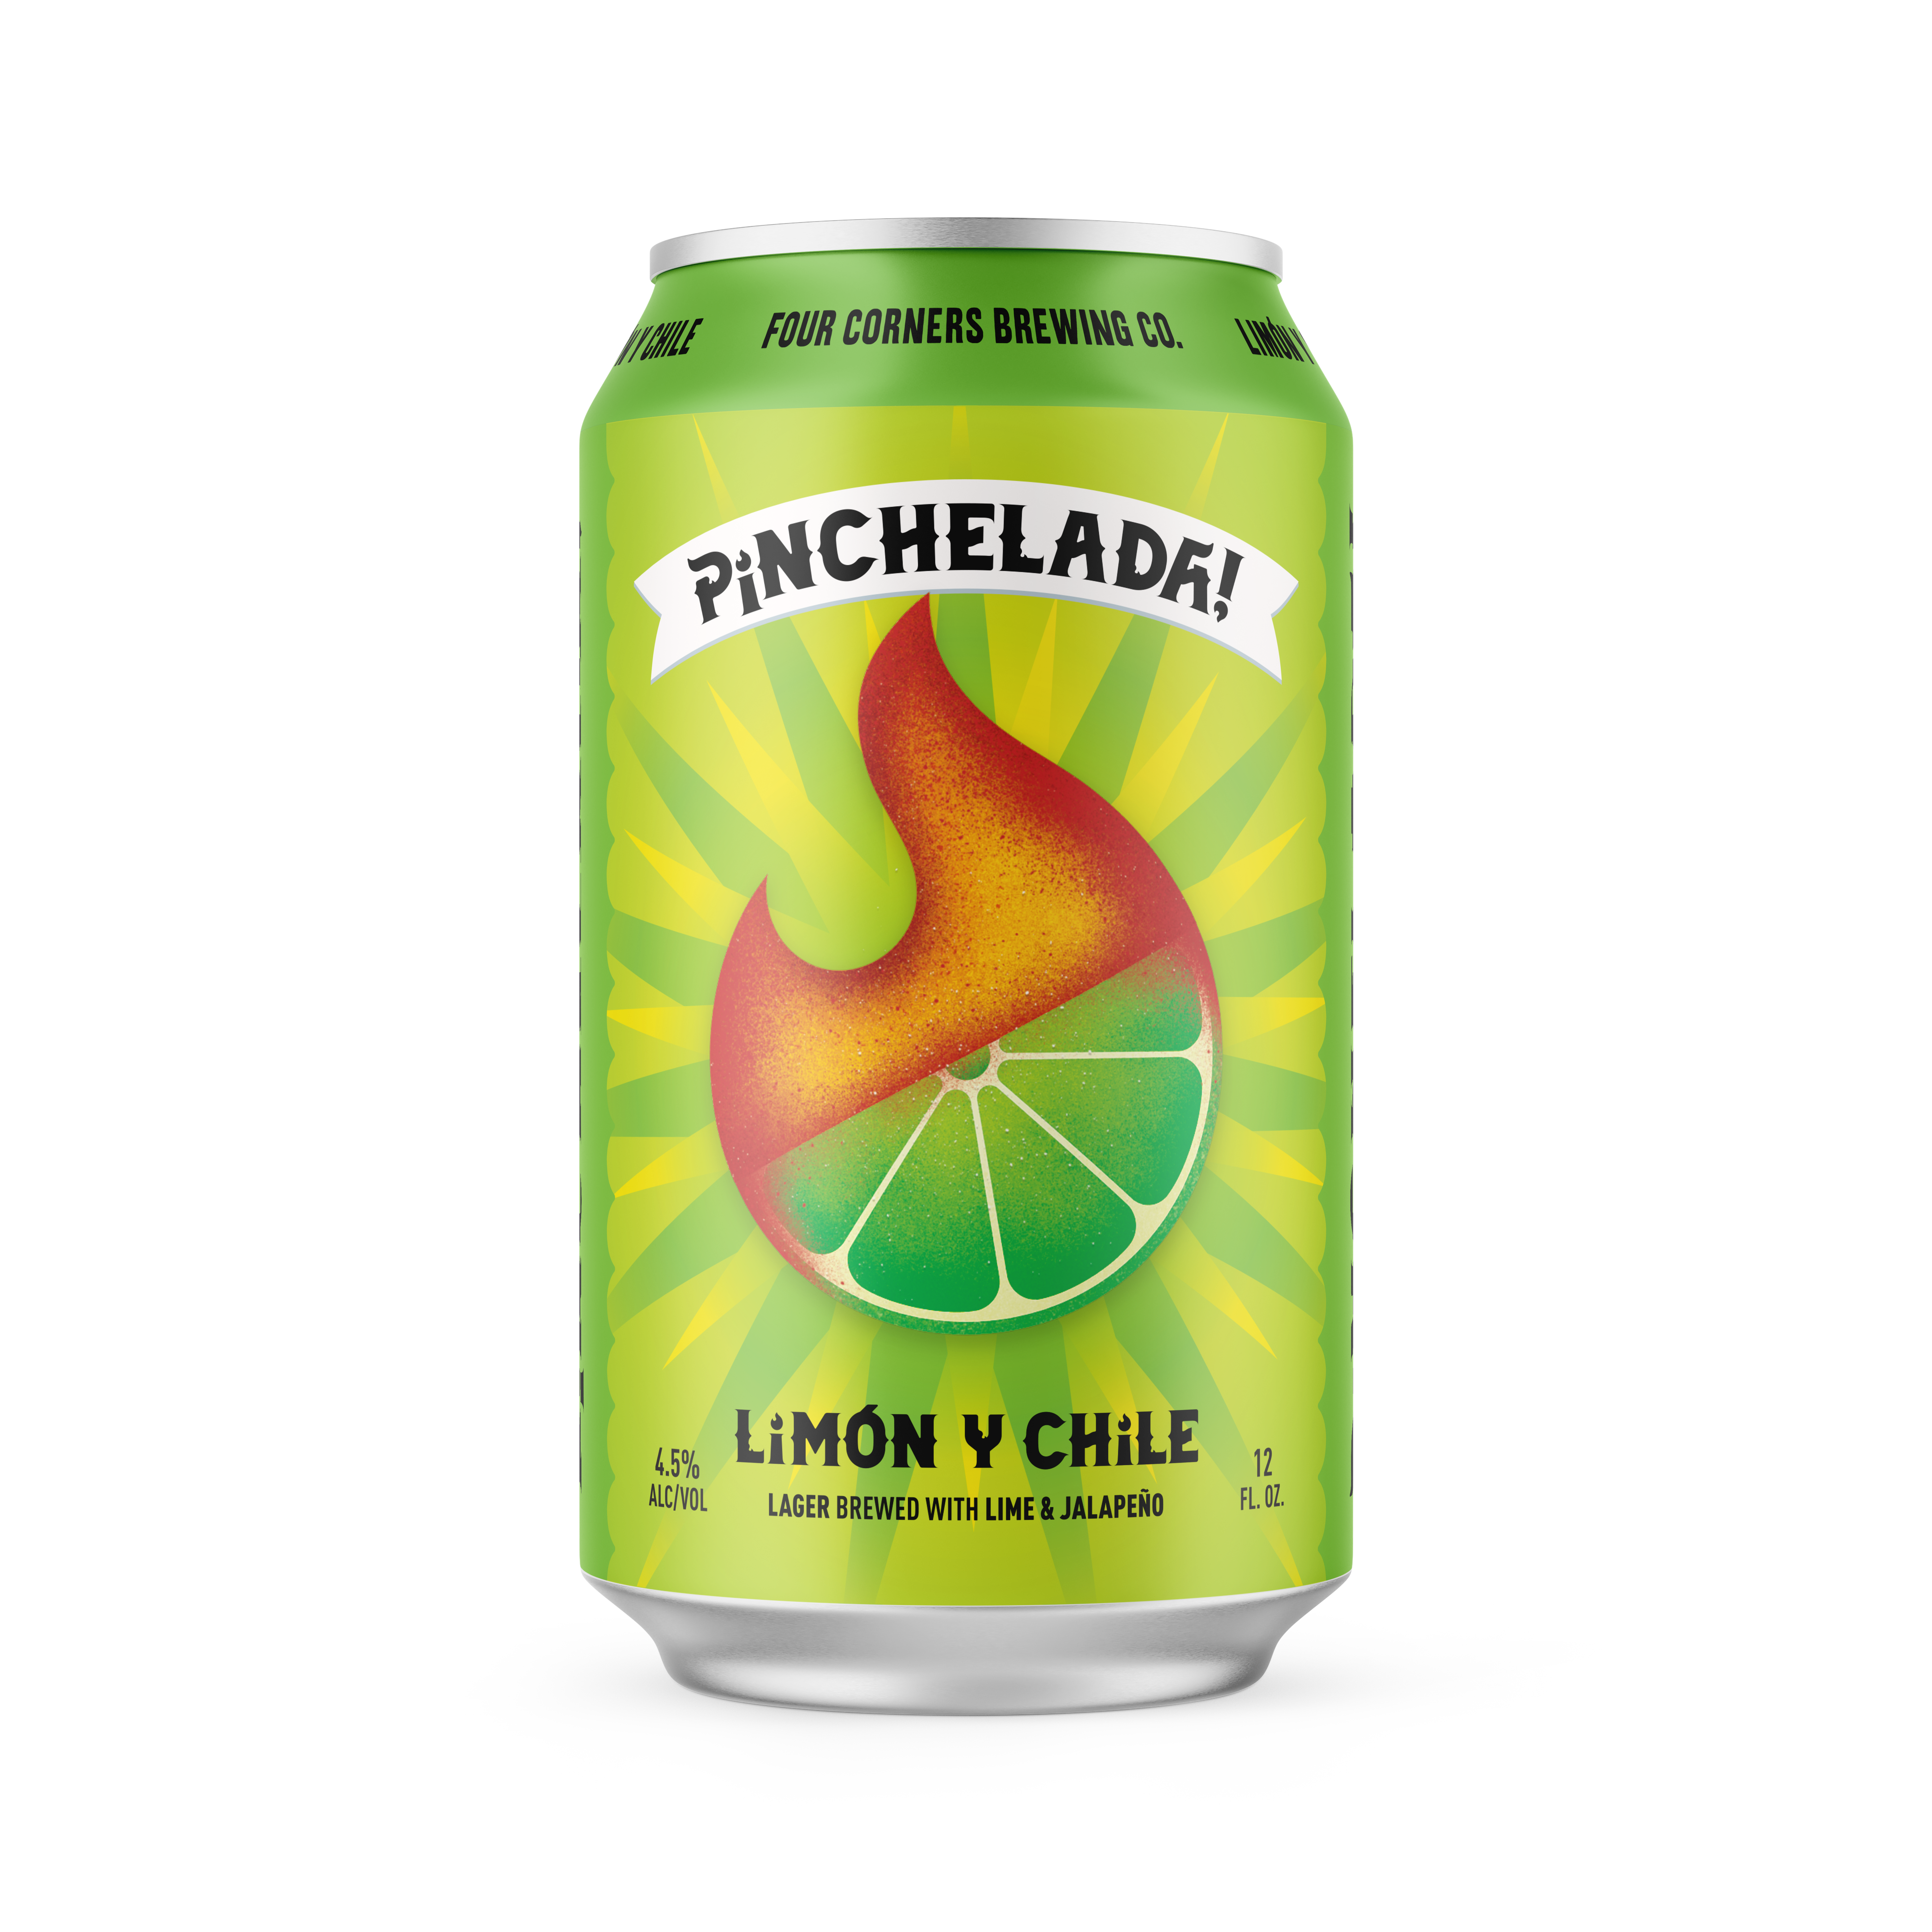 Our goal was to brew something refreshingly diferente. We spent months creating the balance of aromas, flavors and subtle-heat intensity of this Limon y Chile chelada. The result is an easy- drinking, crisp lager with tart lime flavor and a zesty finish.